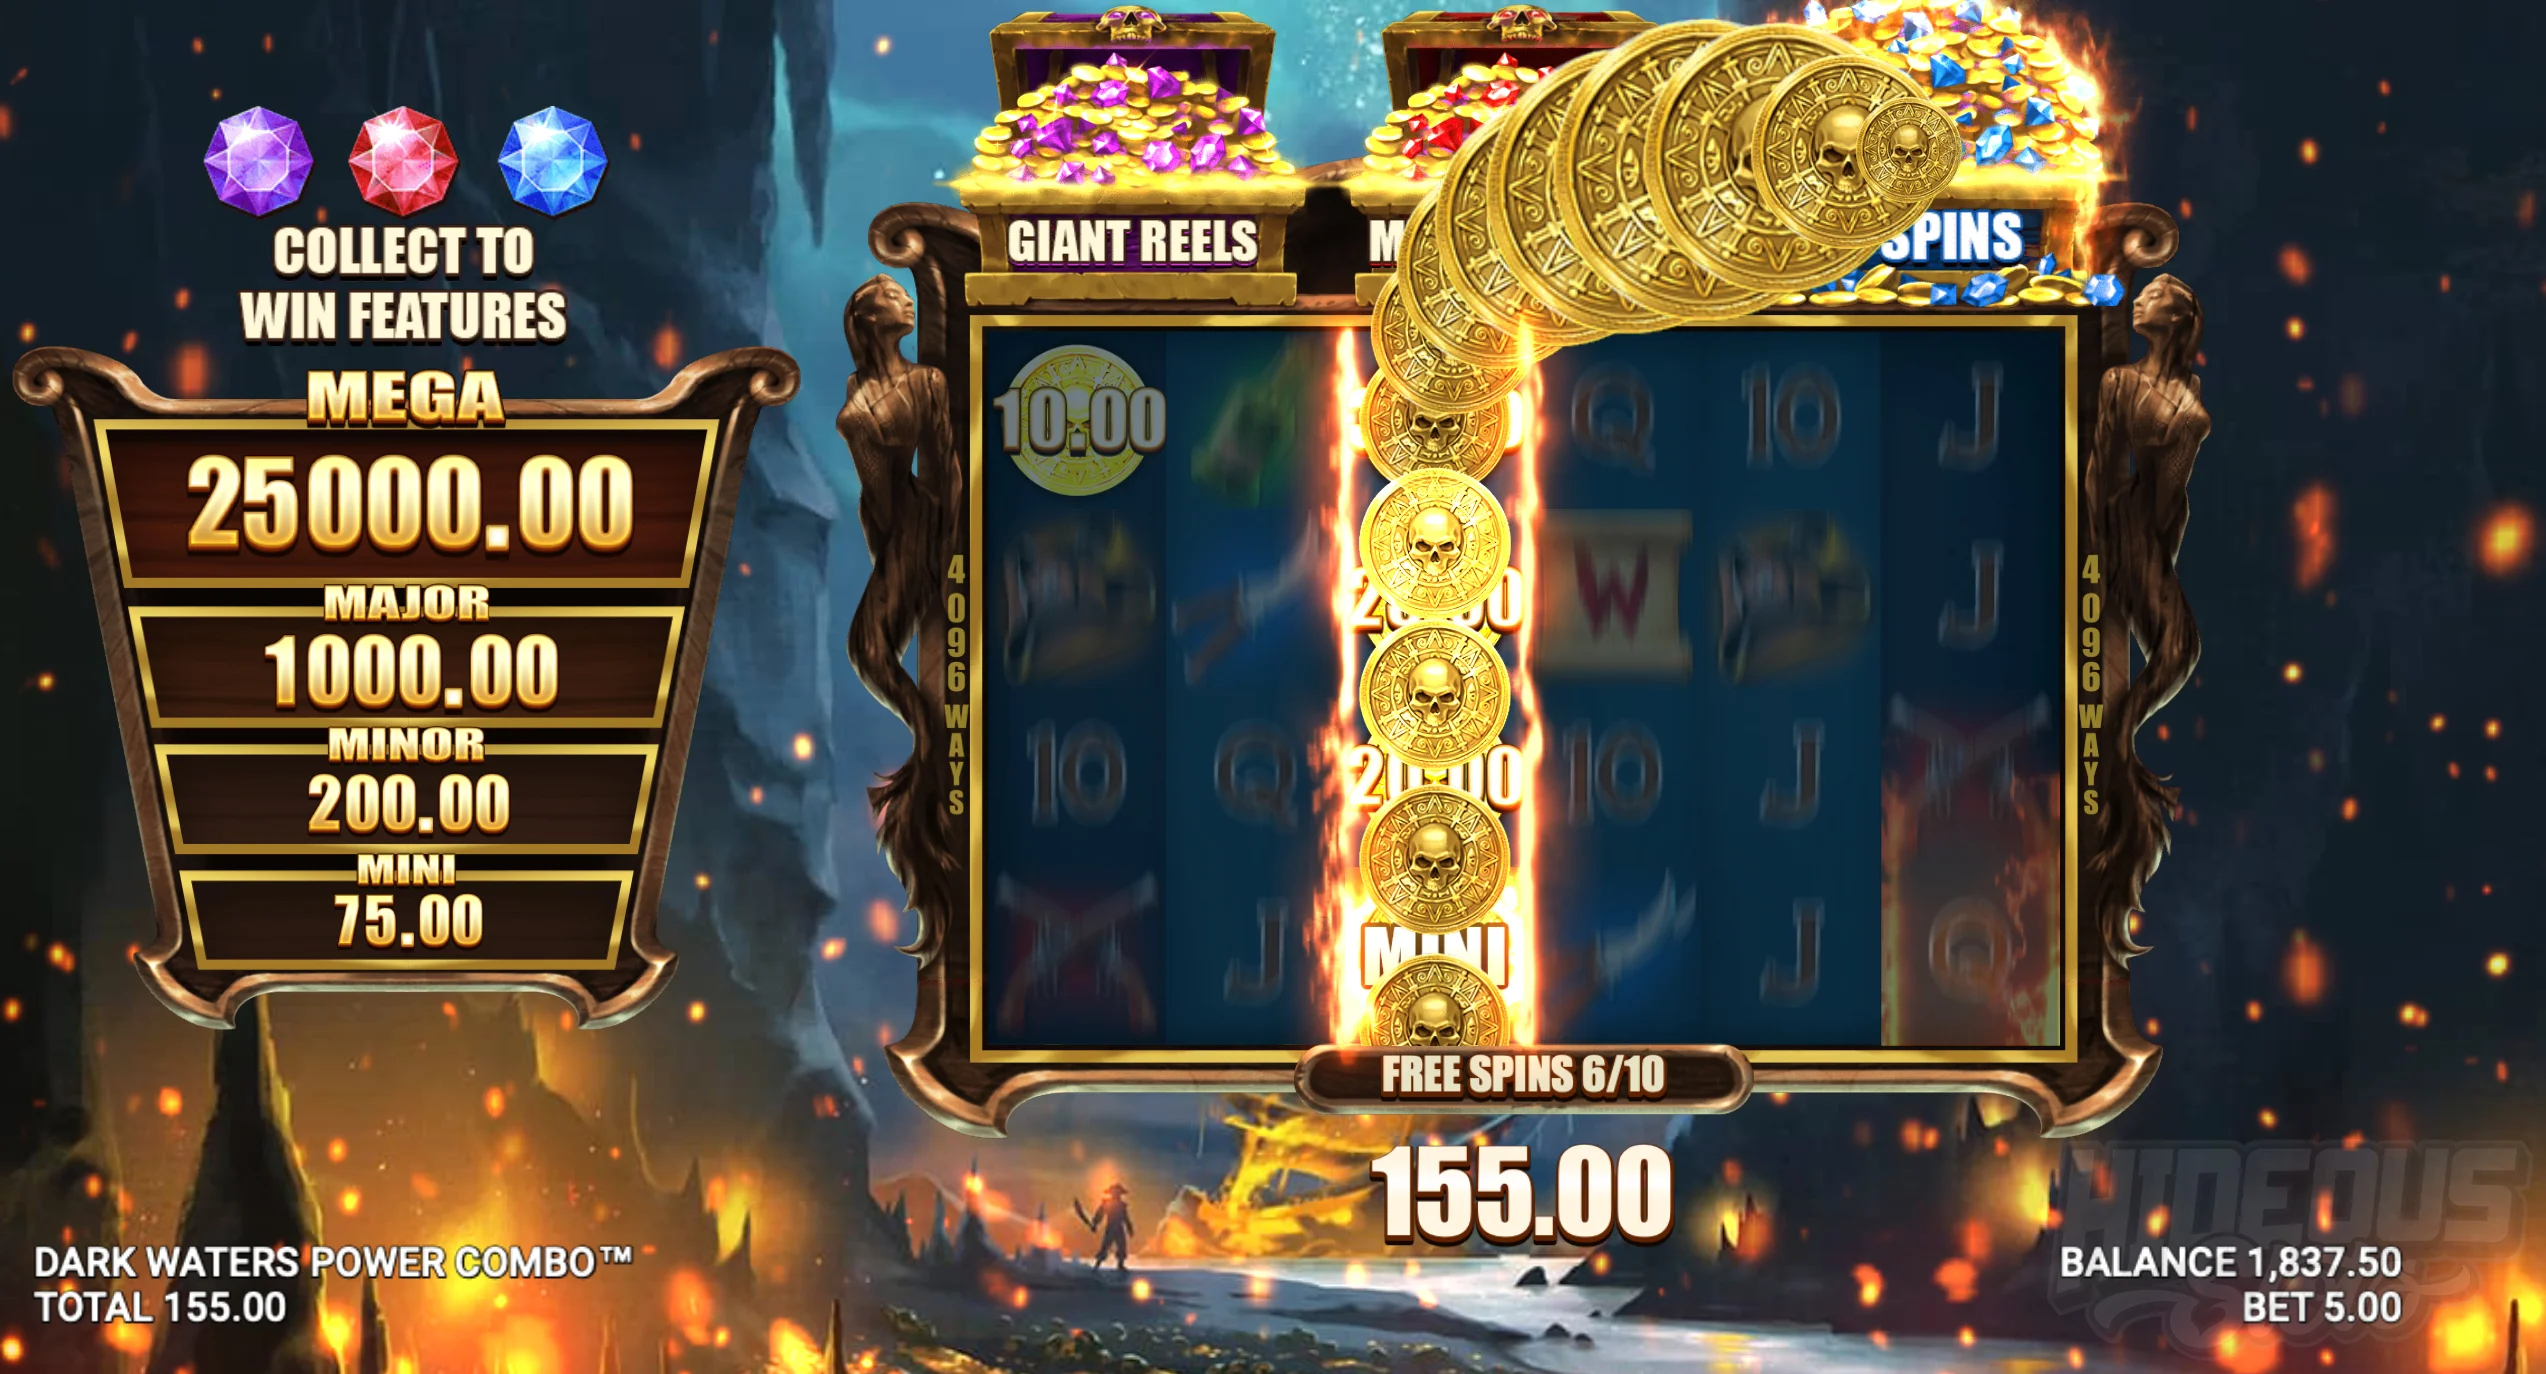 Dark Waters Power Combo Free Spins With Golden Reel Feature